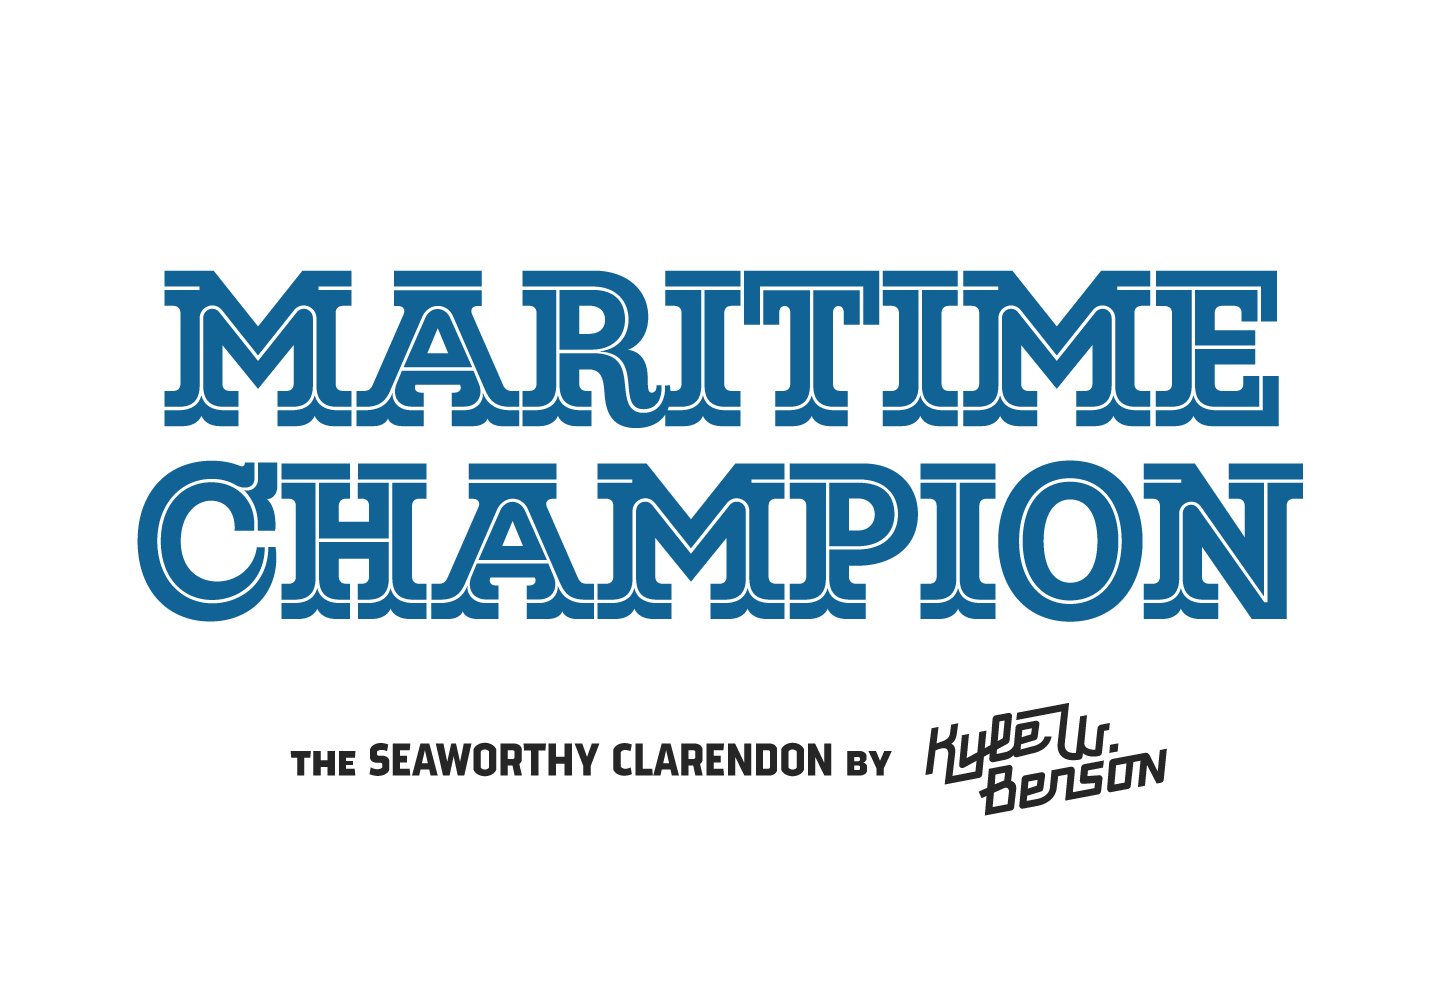 Maritime Champion cover image.